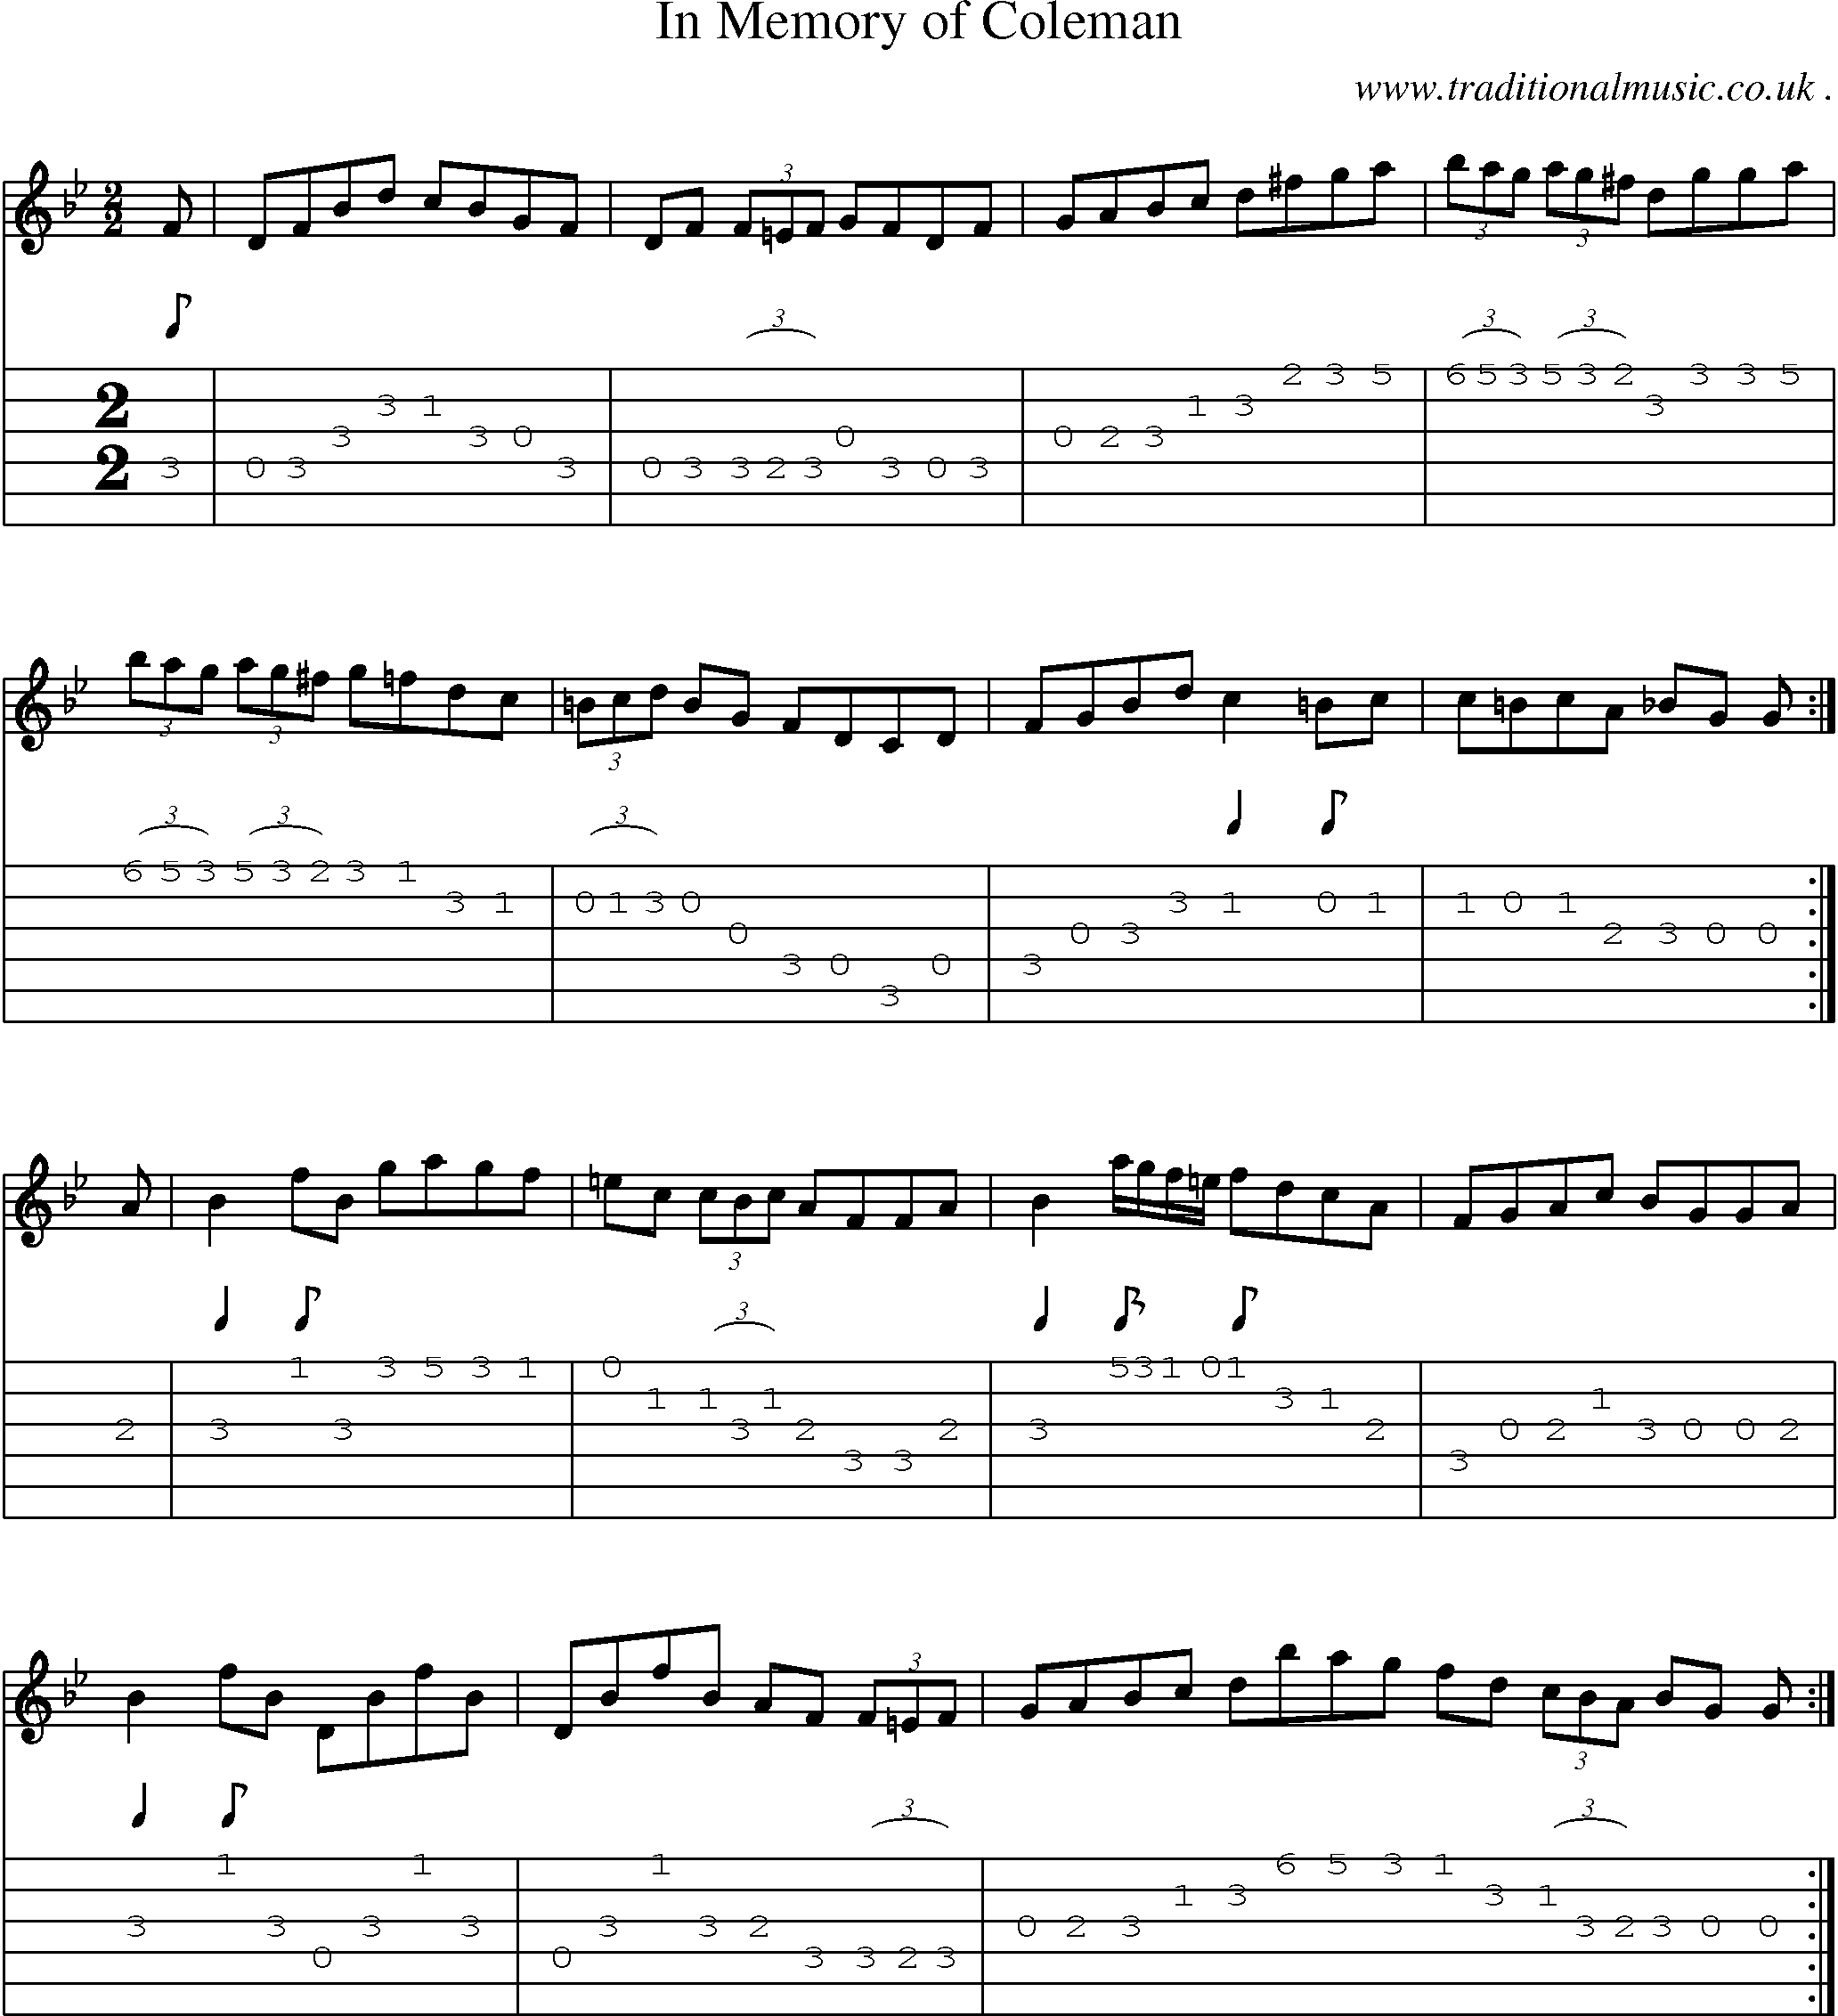 Sheet-music  score, Chords and Guitar Tabs for In Memory Of Coleman